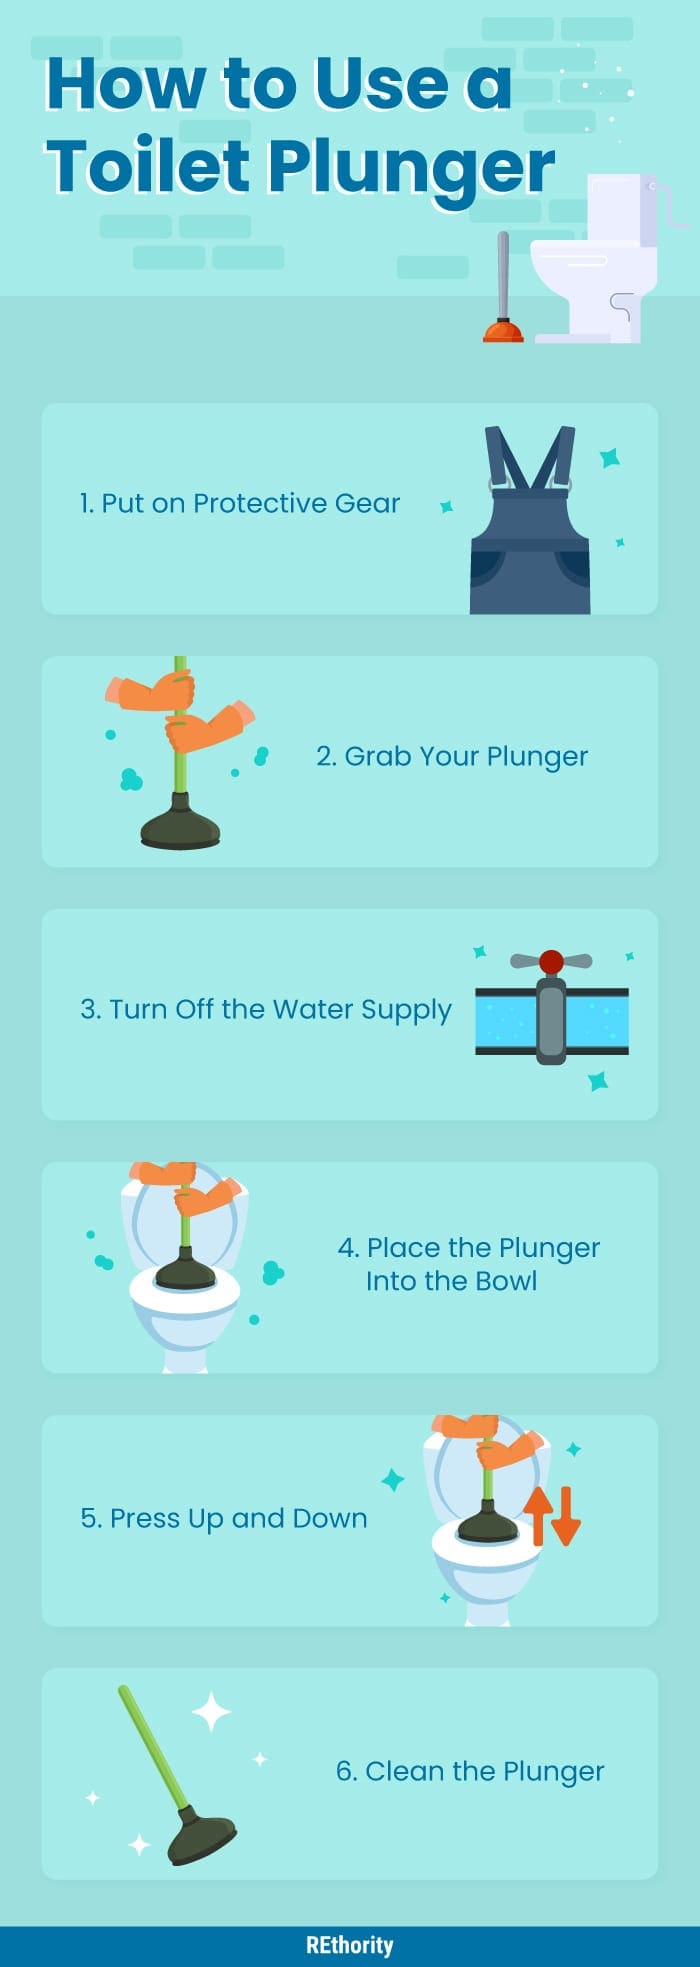 Infographic titled How to Use a Toilet Plunger showing the various steps necessary